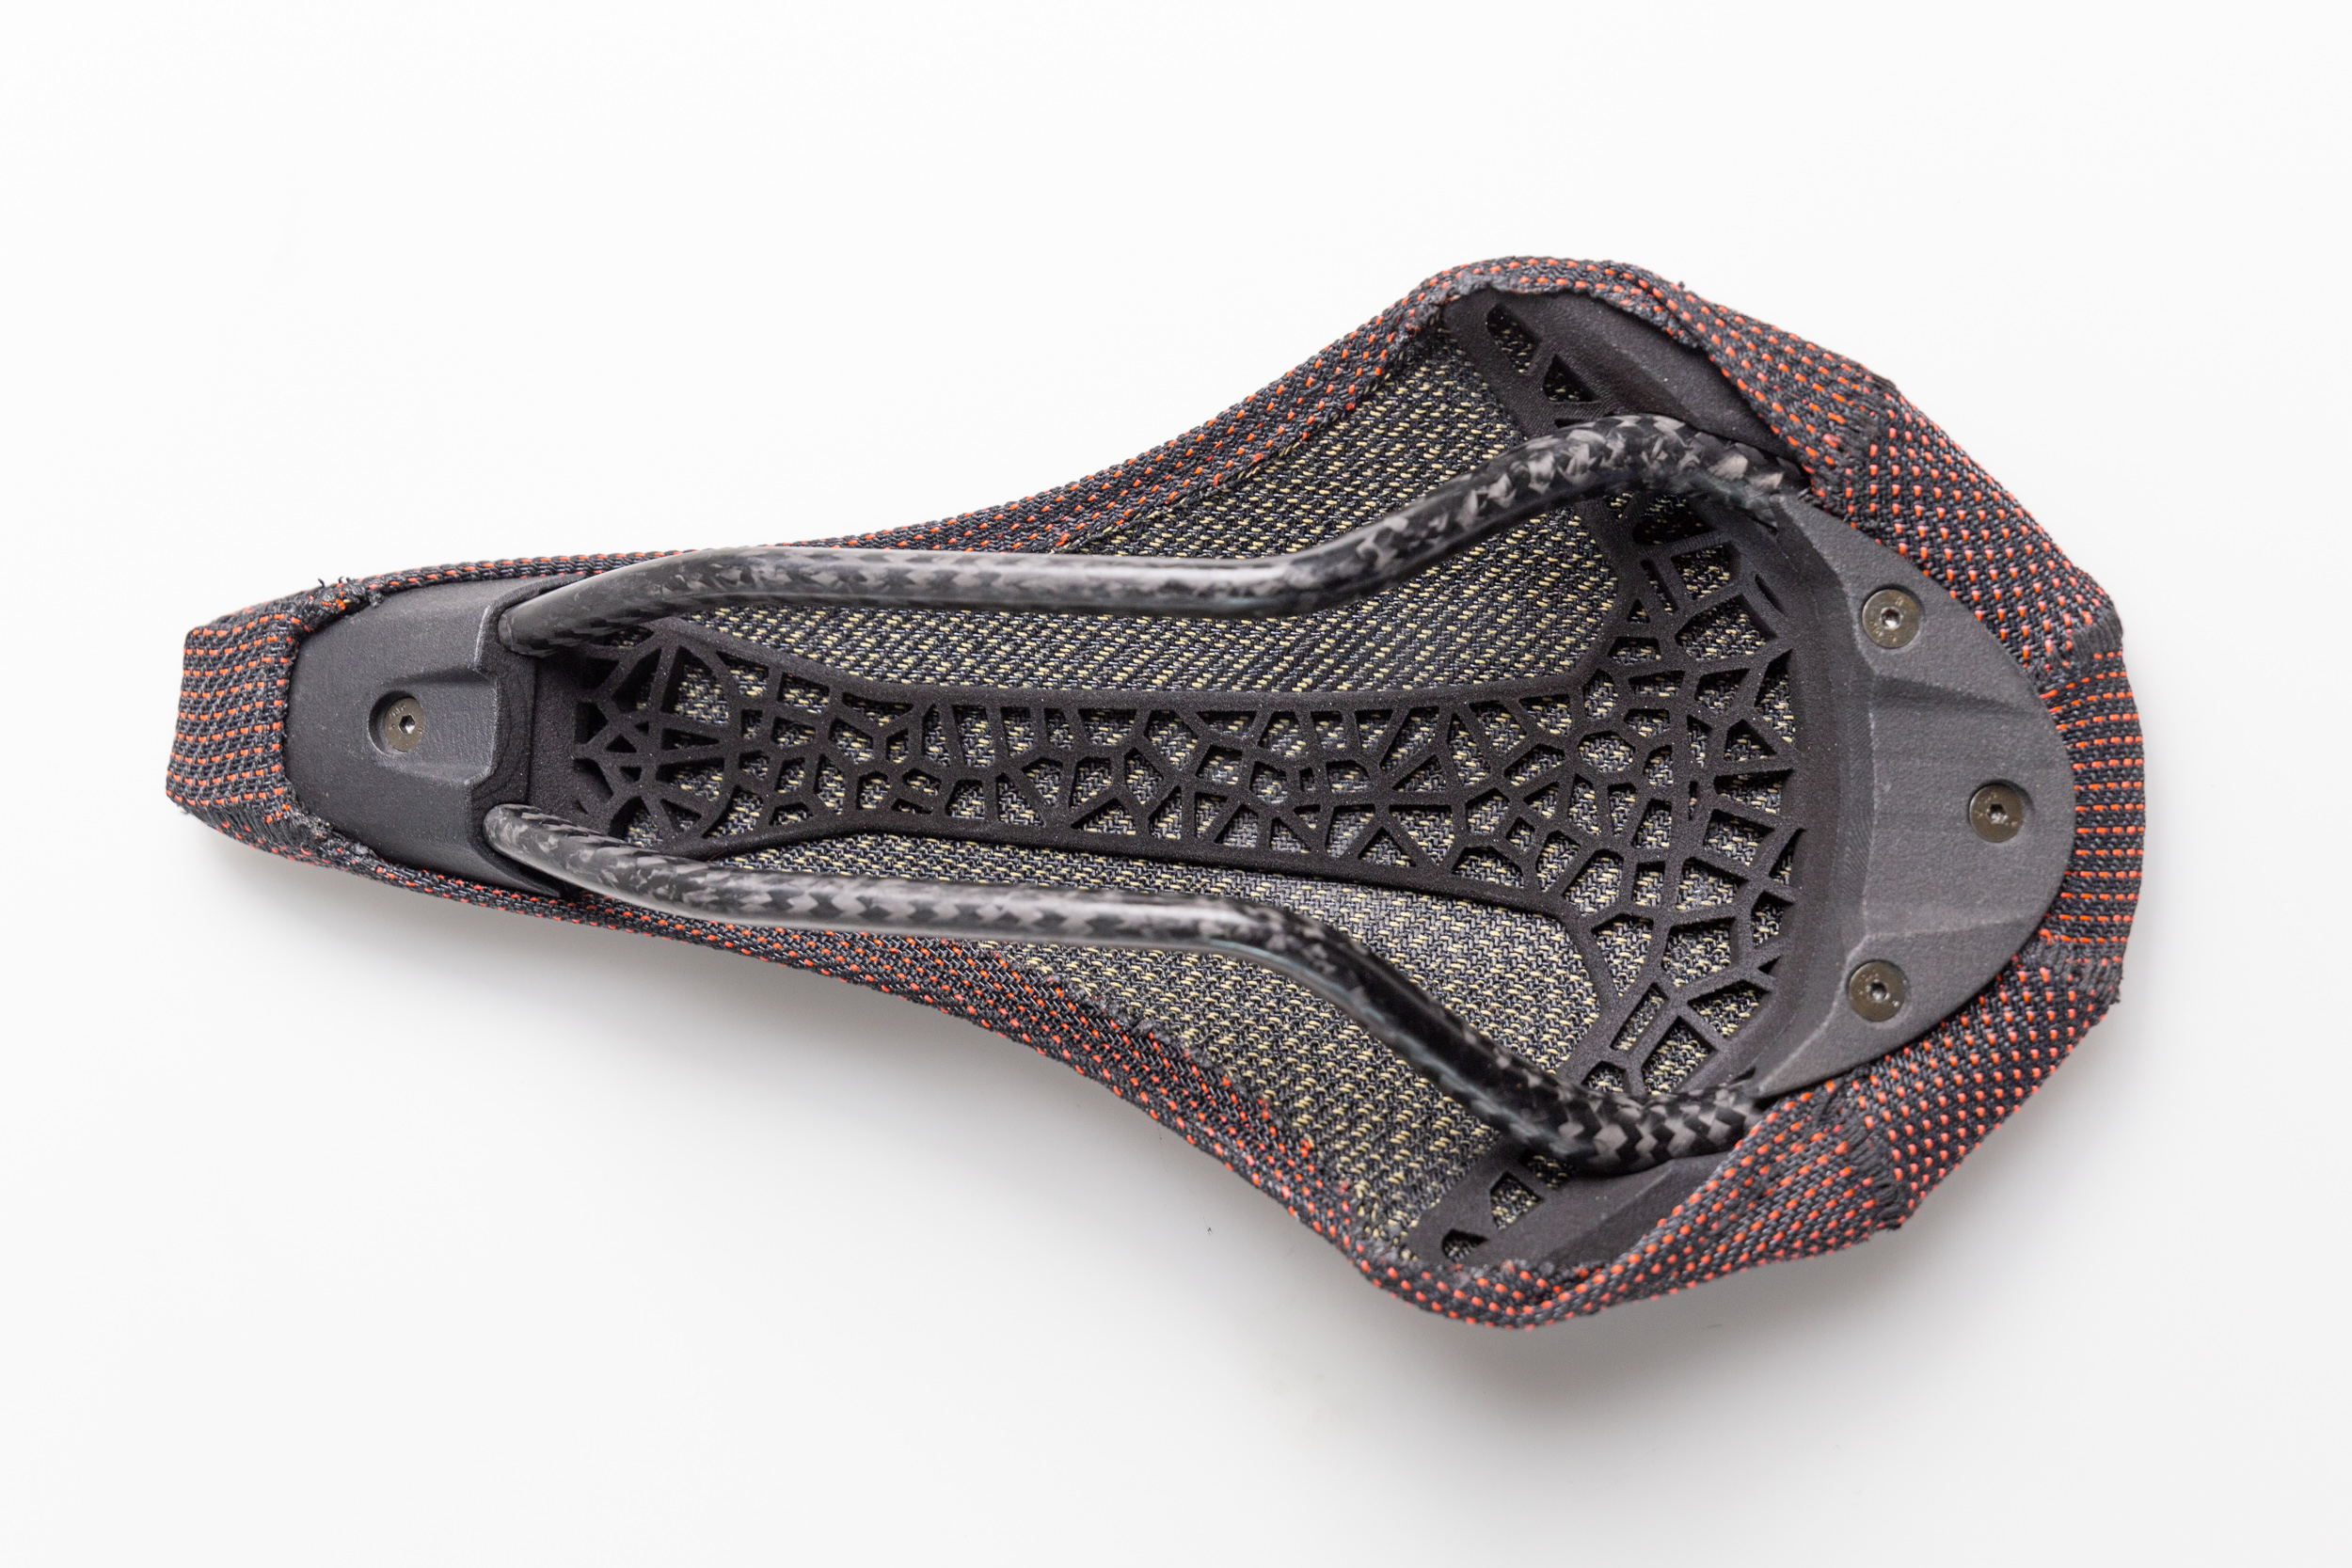 Consisting of a semi-rigid, personalised 3D printed spine and a 3D thermoformed seat pad, the saddle was designed with additive manufacturing in mind. Photo via Stratasys.